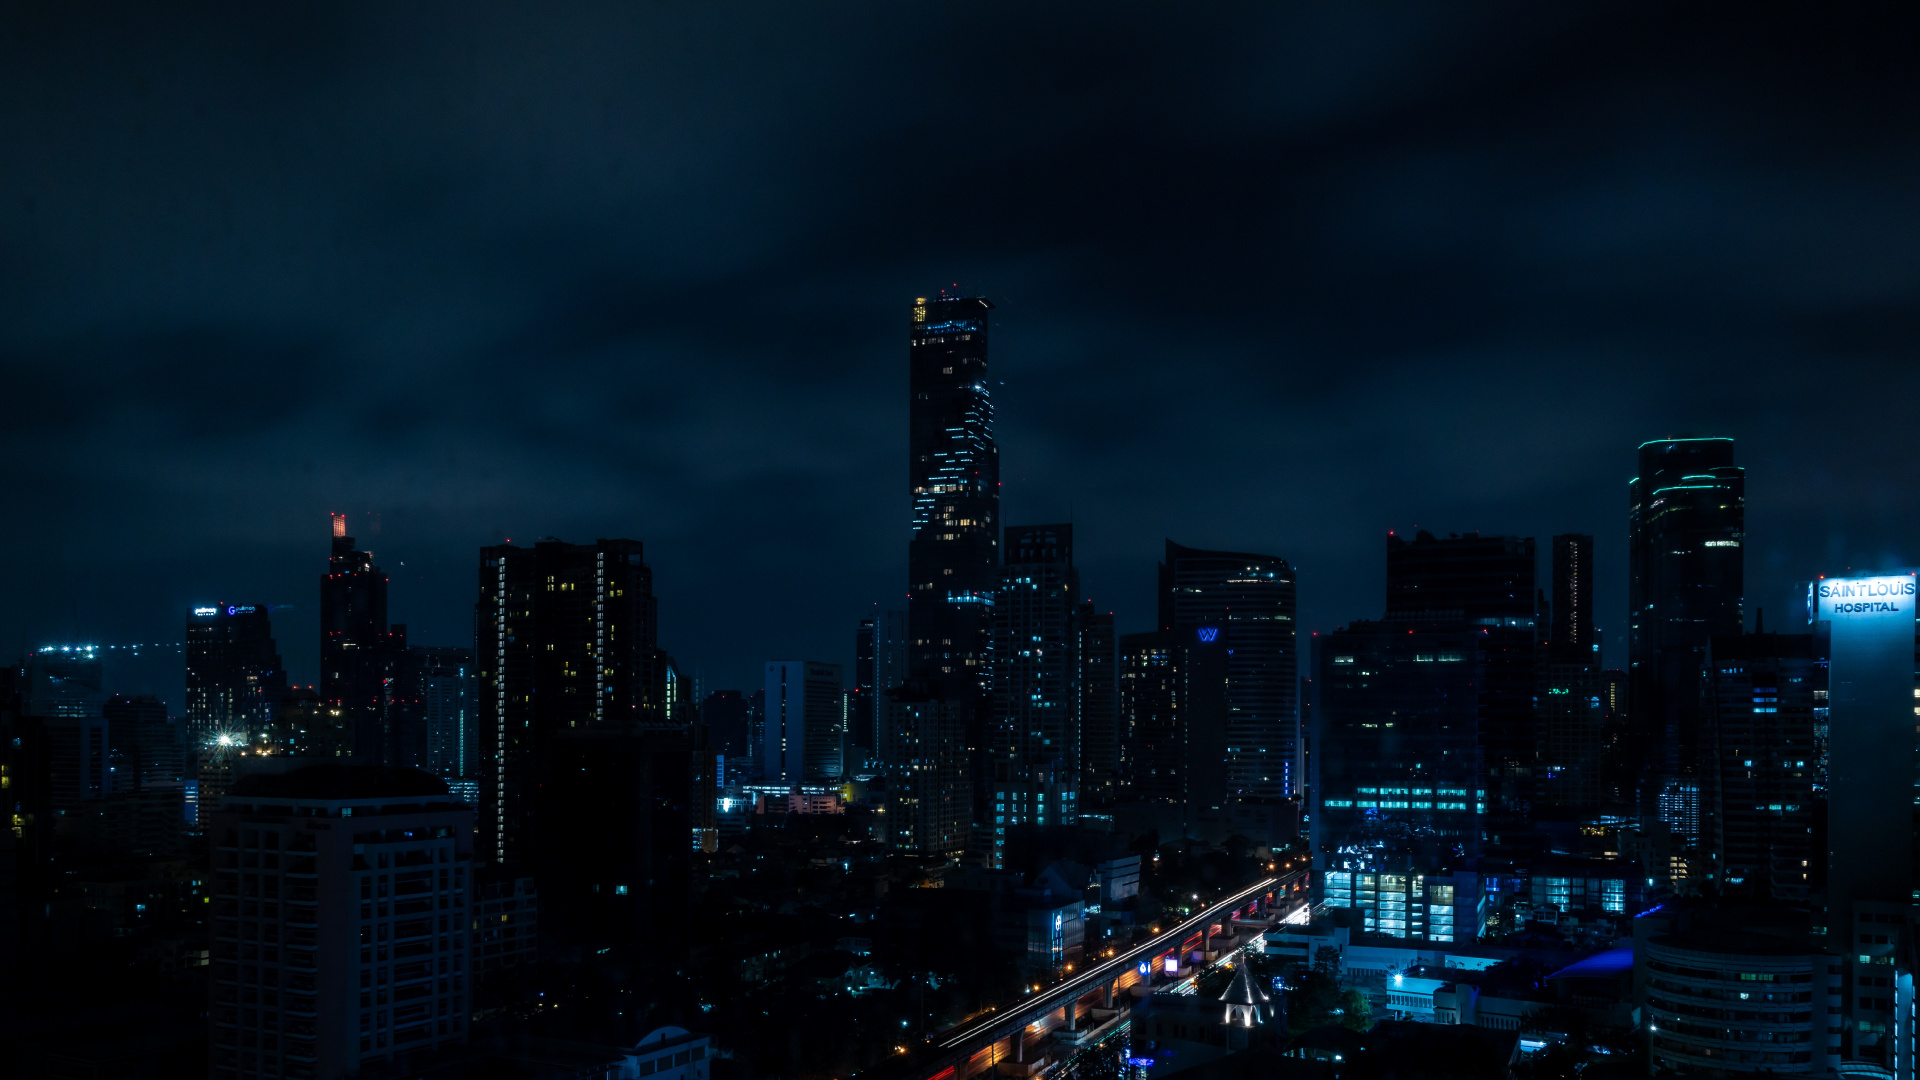 City Skyline During Night Time. Wallpaper in 1920x1080 Resolution